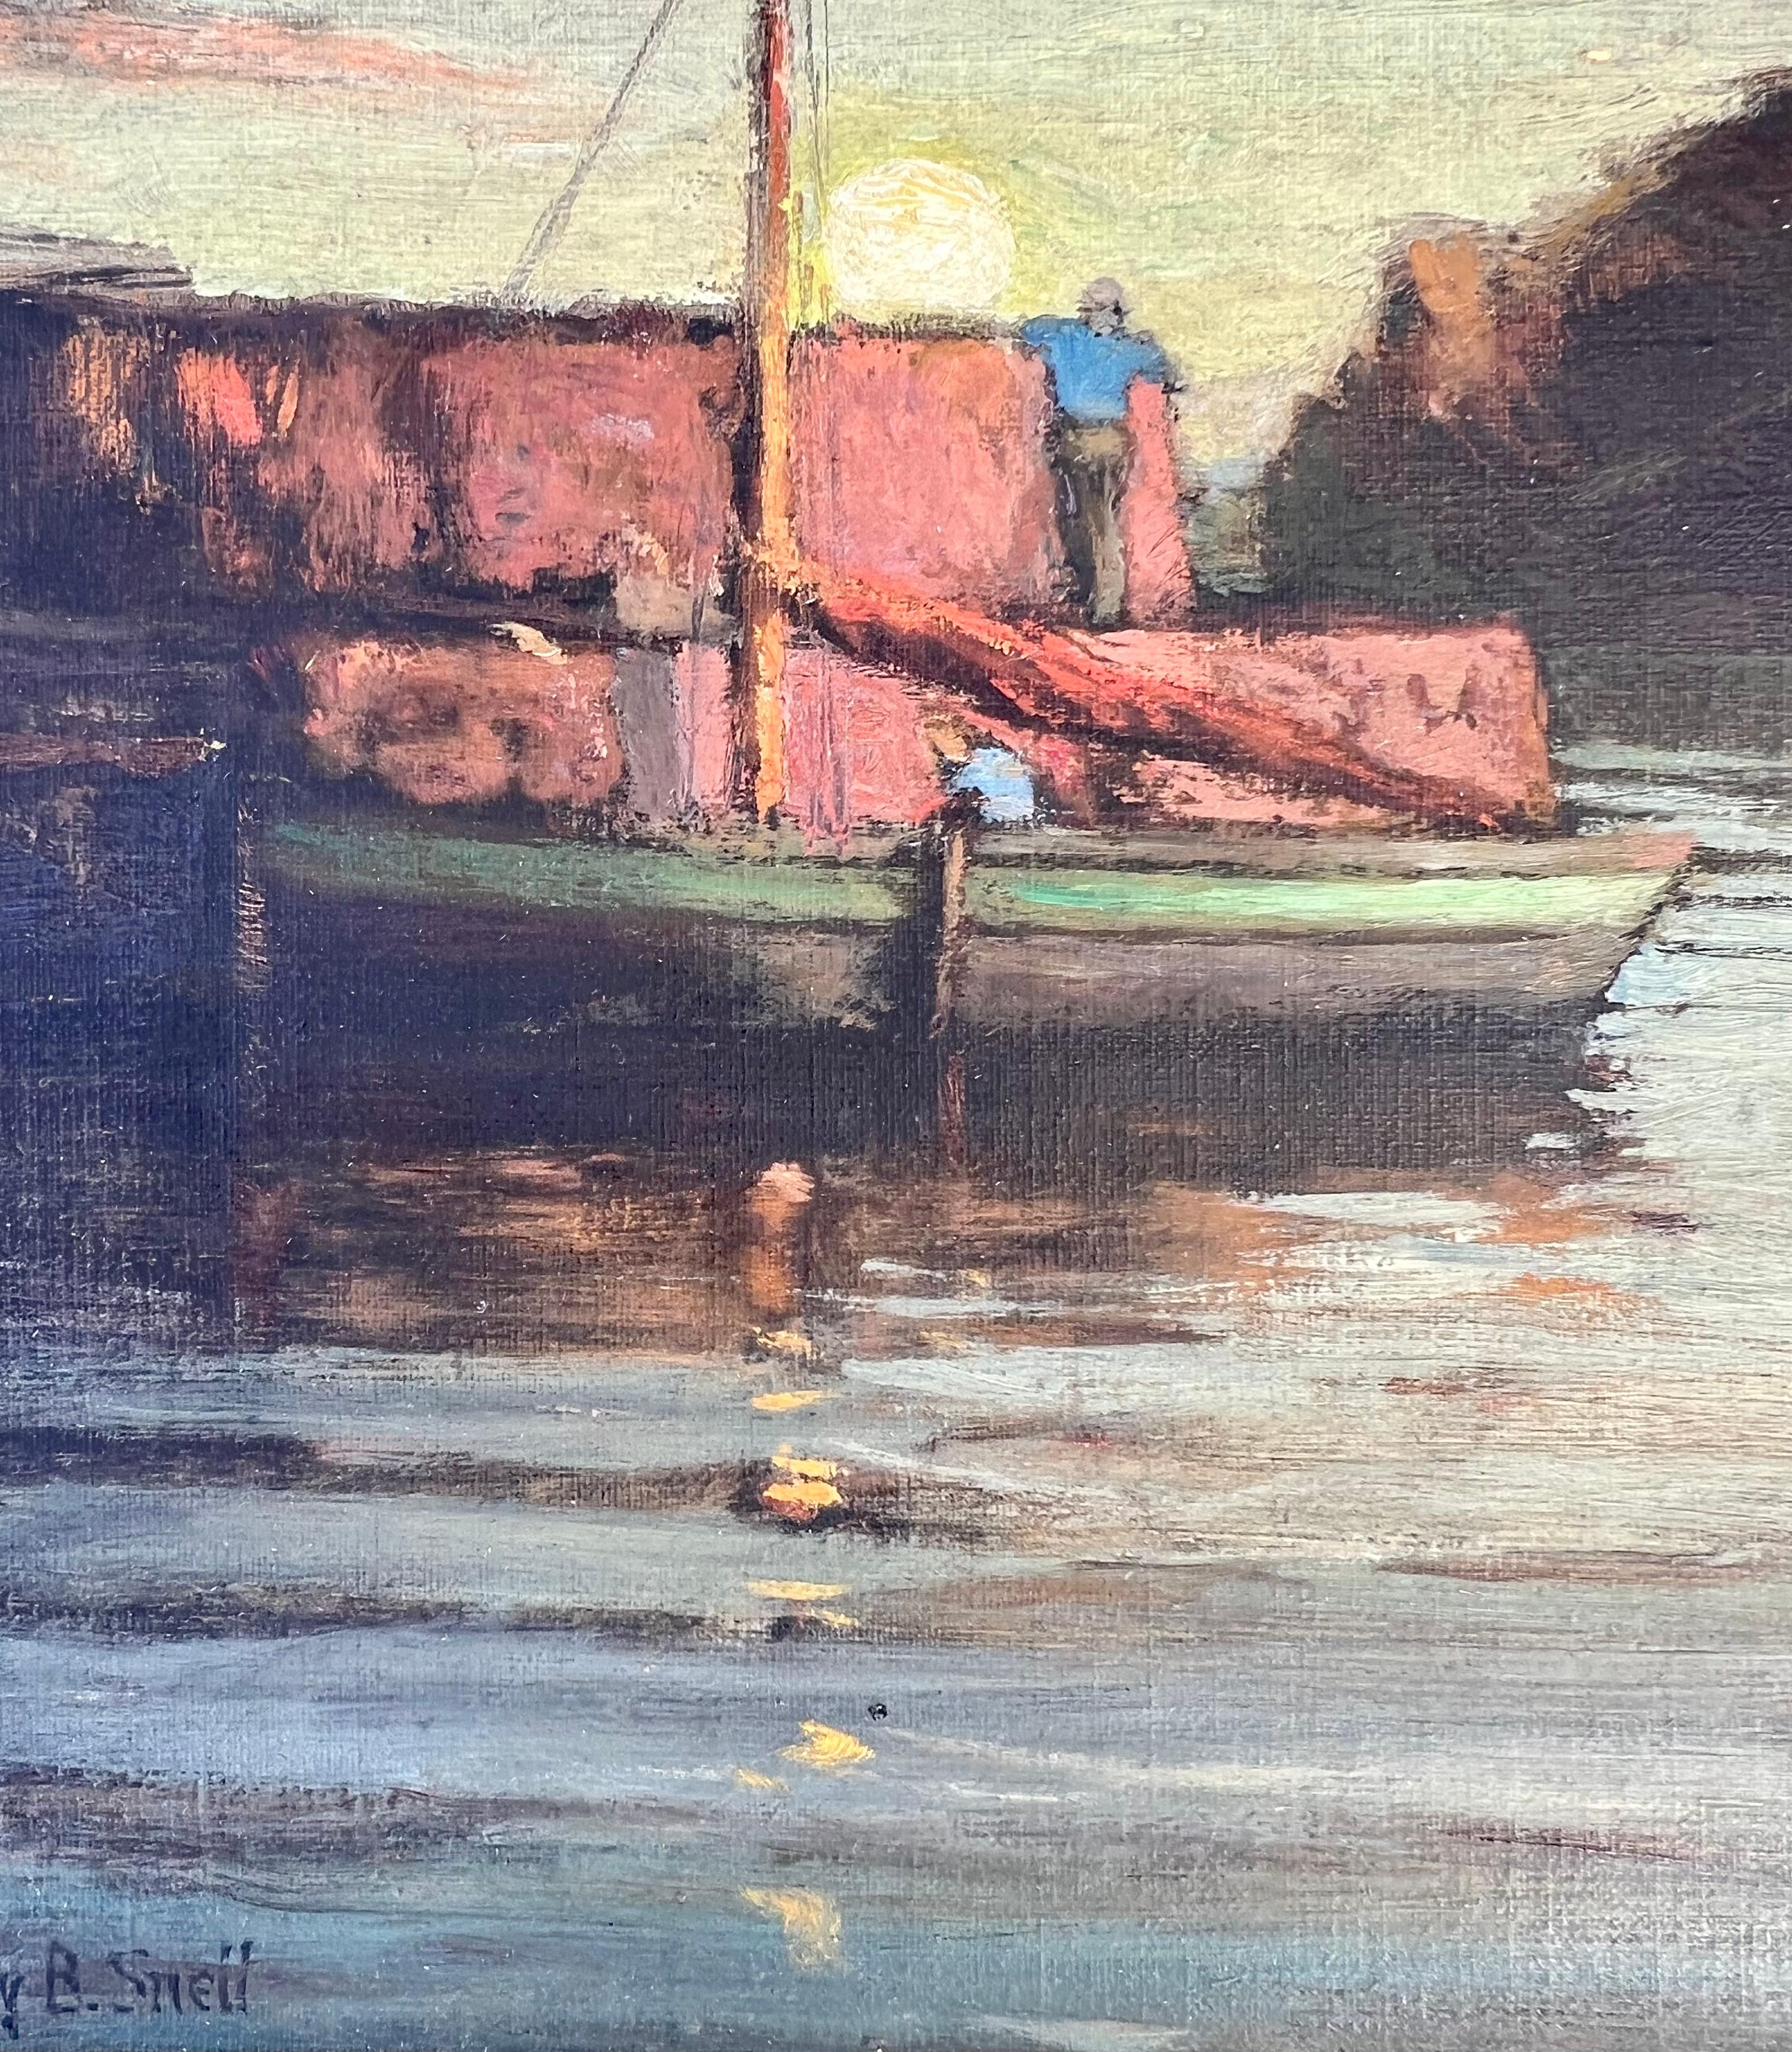 Oil on artist panel, signed in the lower left and inscribed with the title on reverse. 
Dimensions include frame at 7.75